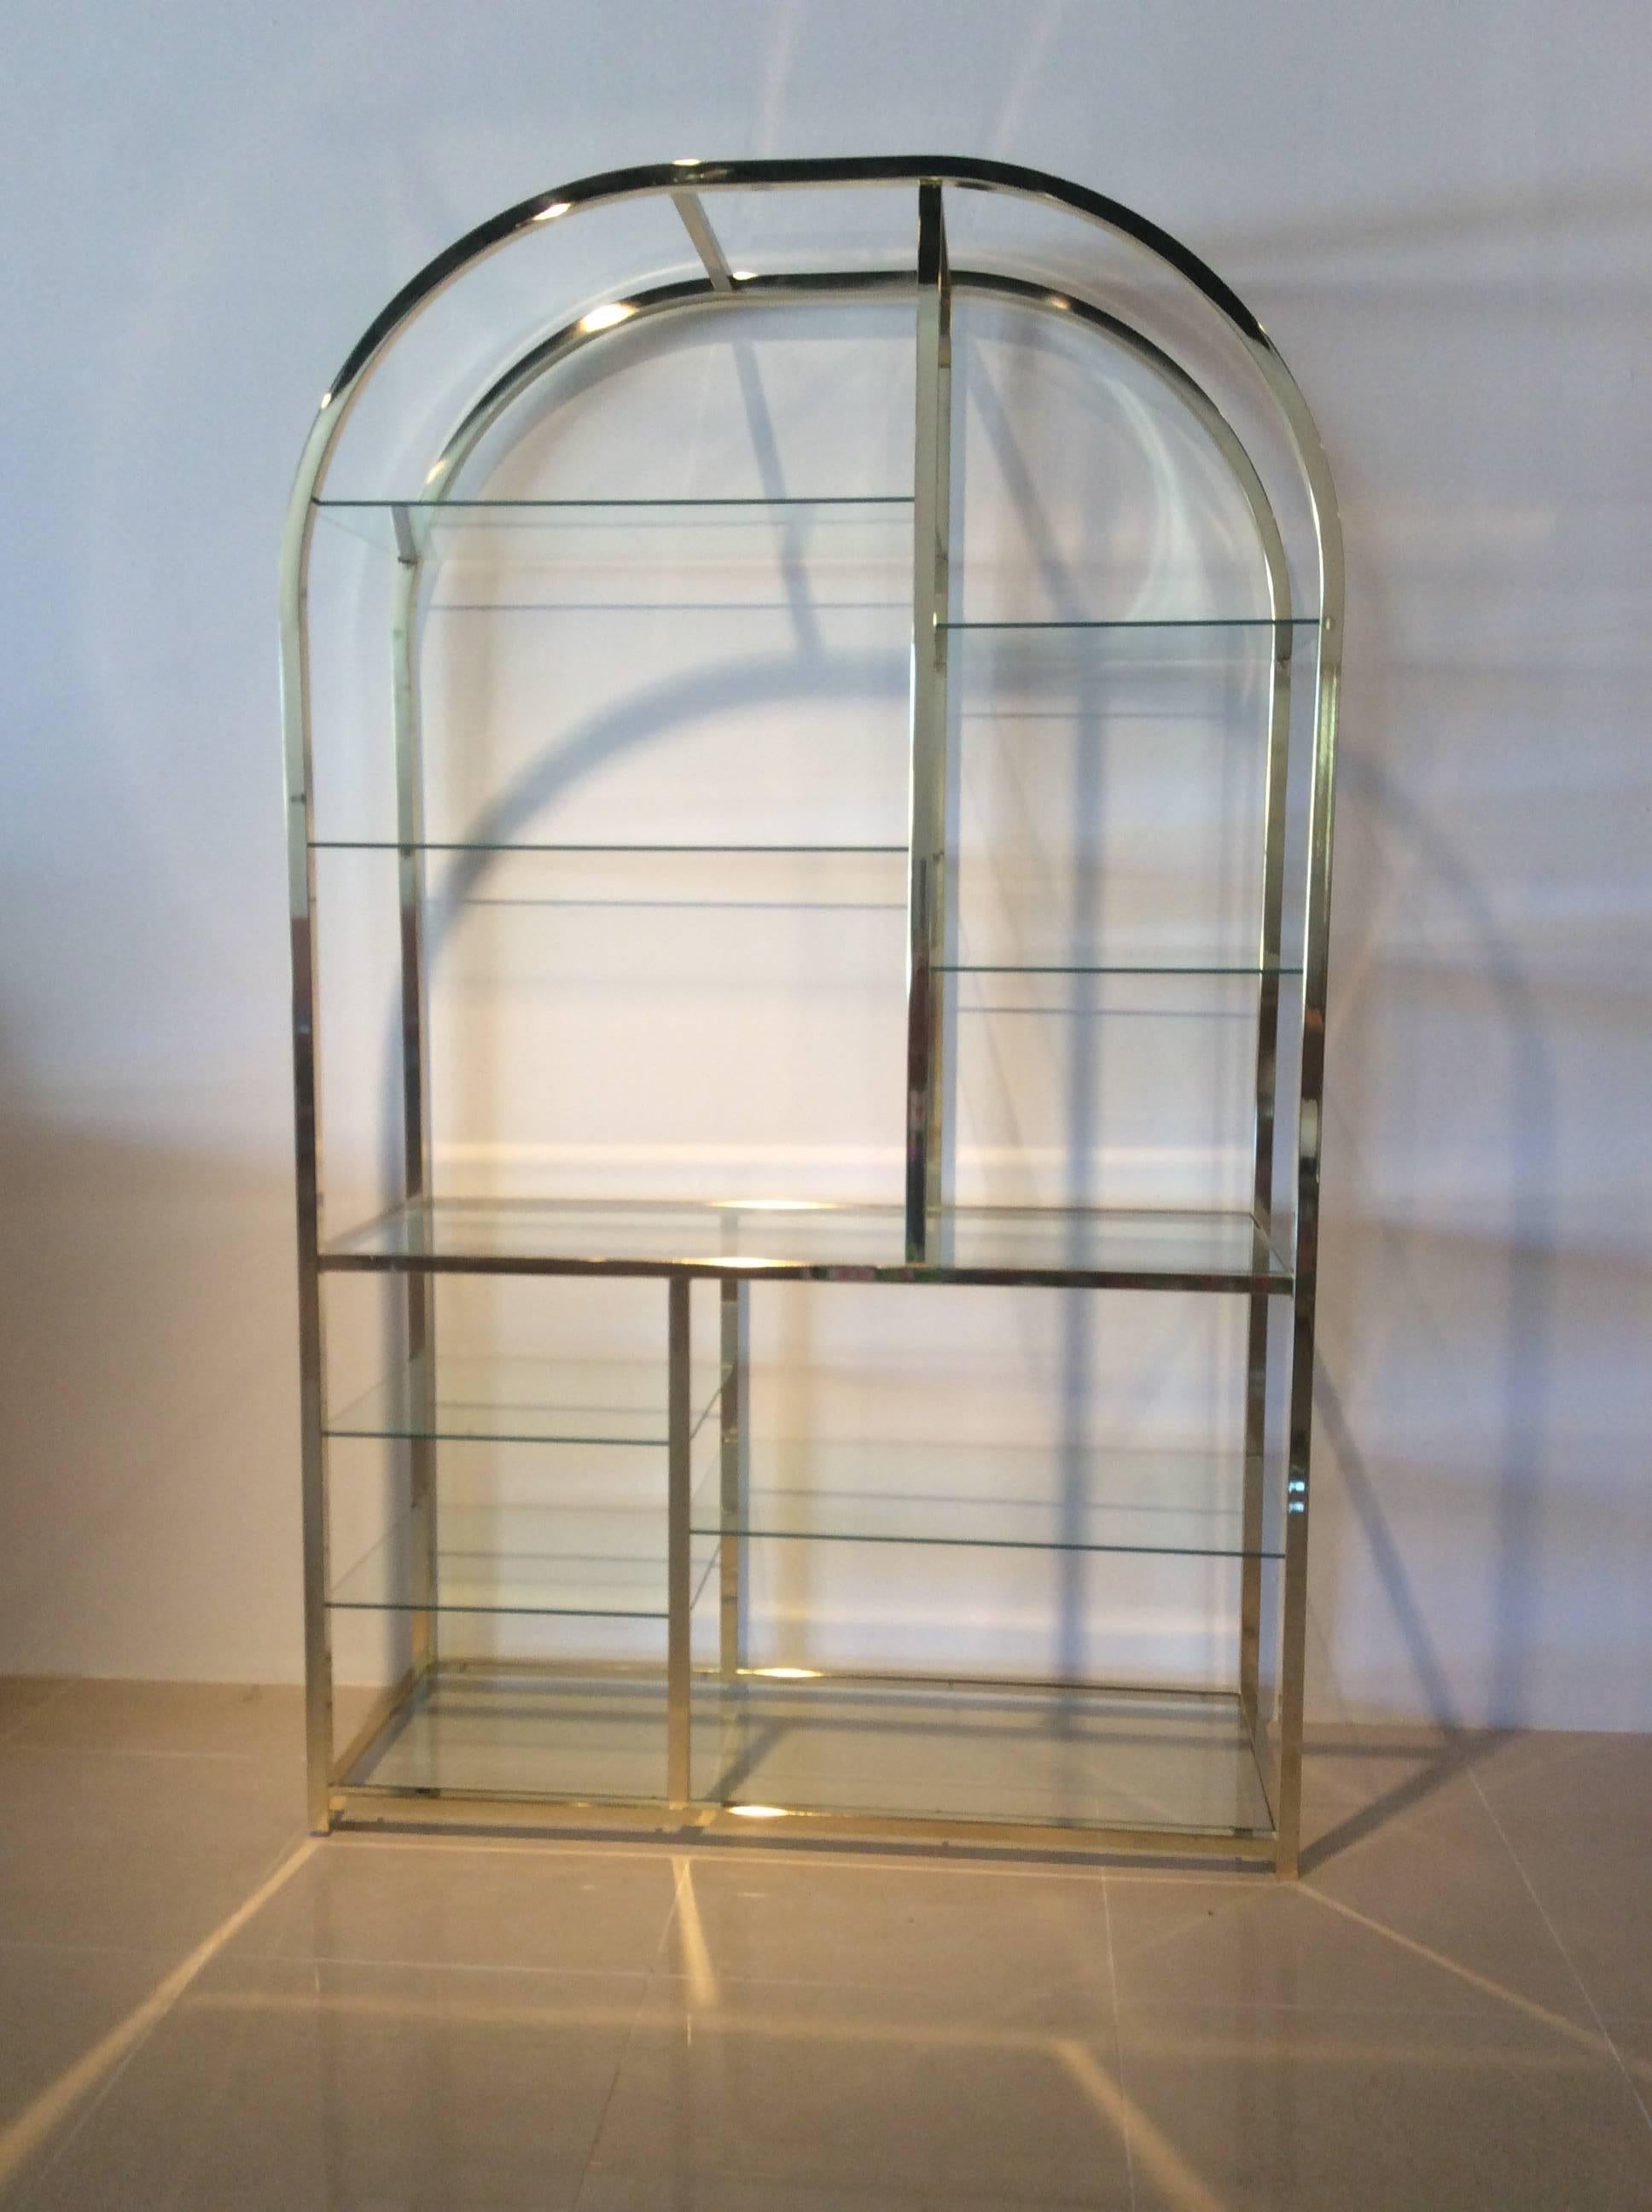 Vintage Hollywood Palm Beach Regency DIA Design Institute of America DIA arched brass etagere display shelf. Tagged DIA and pictured. On one side there is a few patina spots that are pictured. Includes nine glass shelves as pictured. 